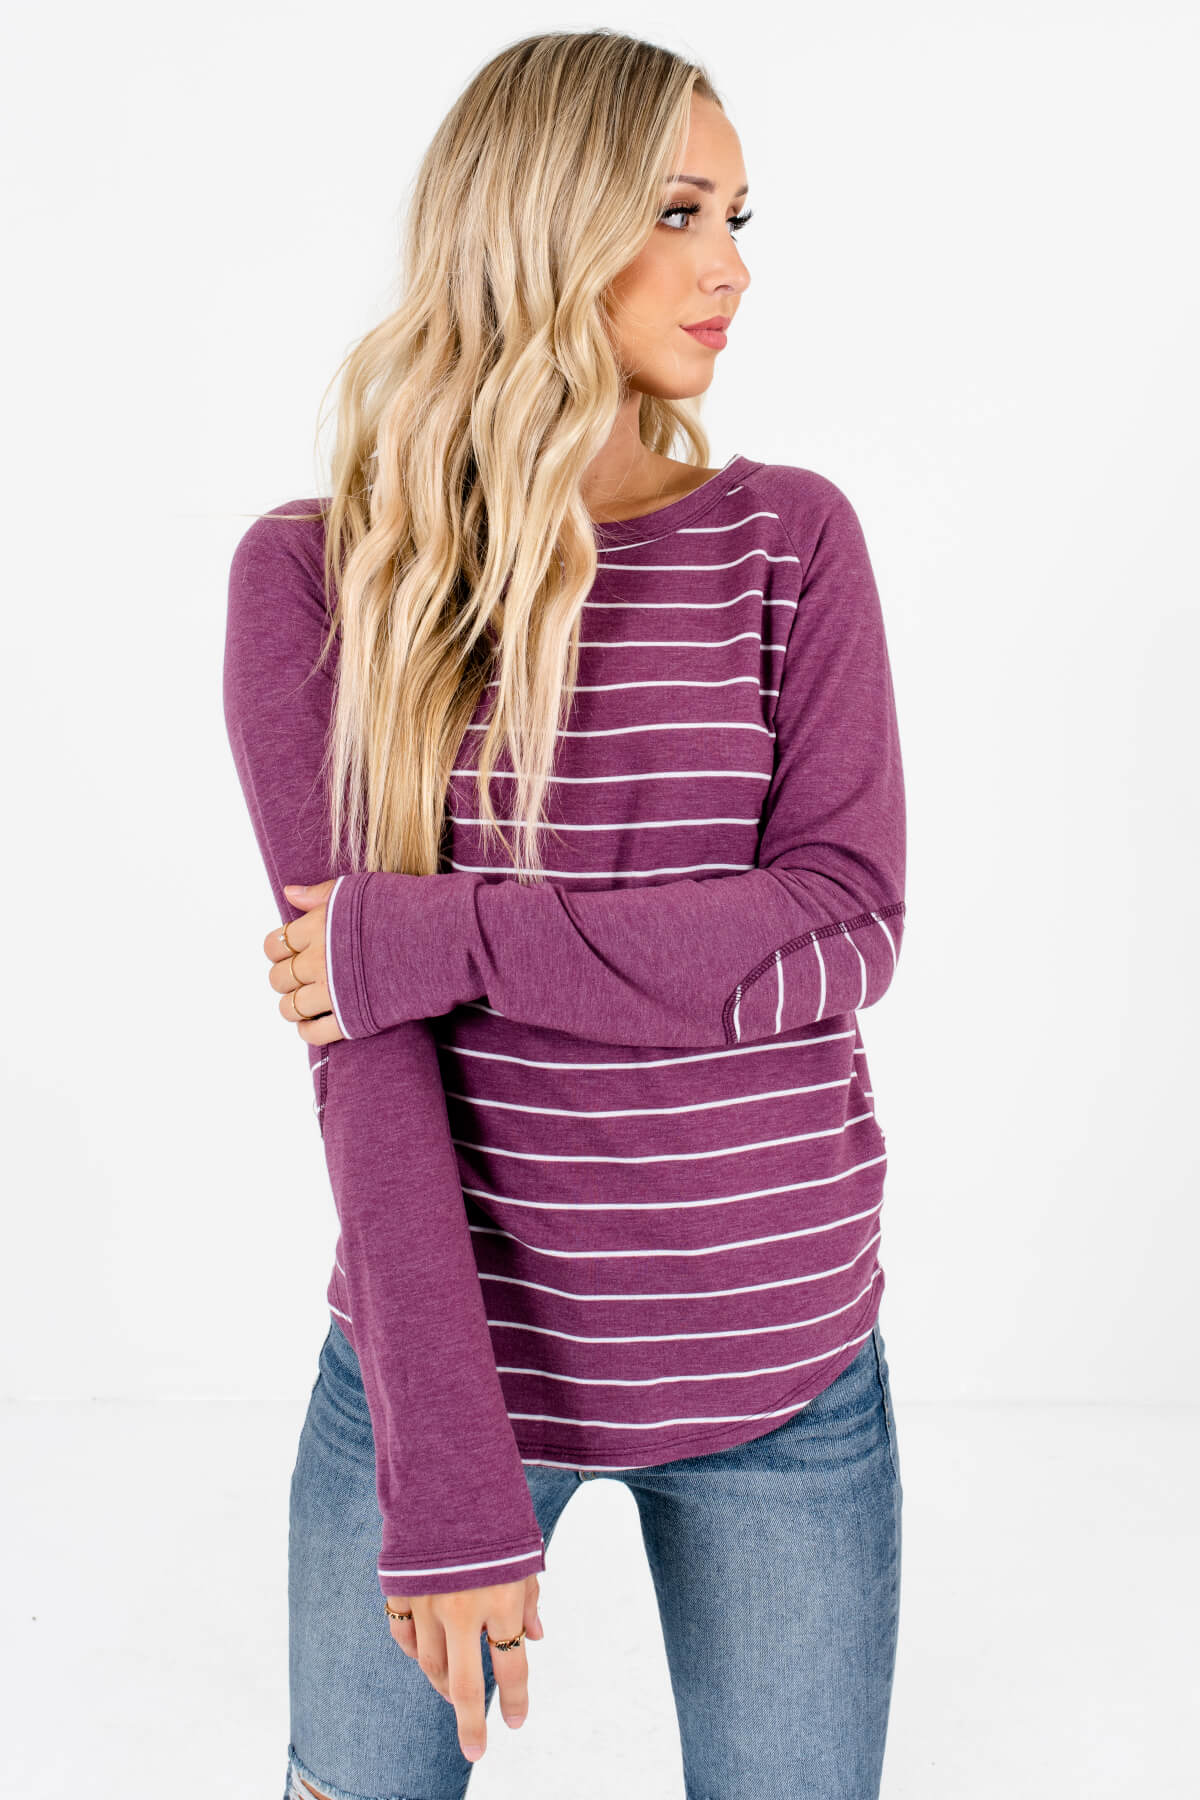 Purple Warm and Cozy Boutique Tops for Women